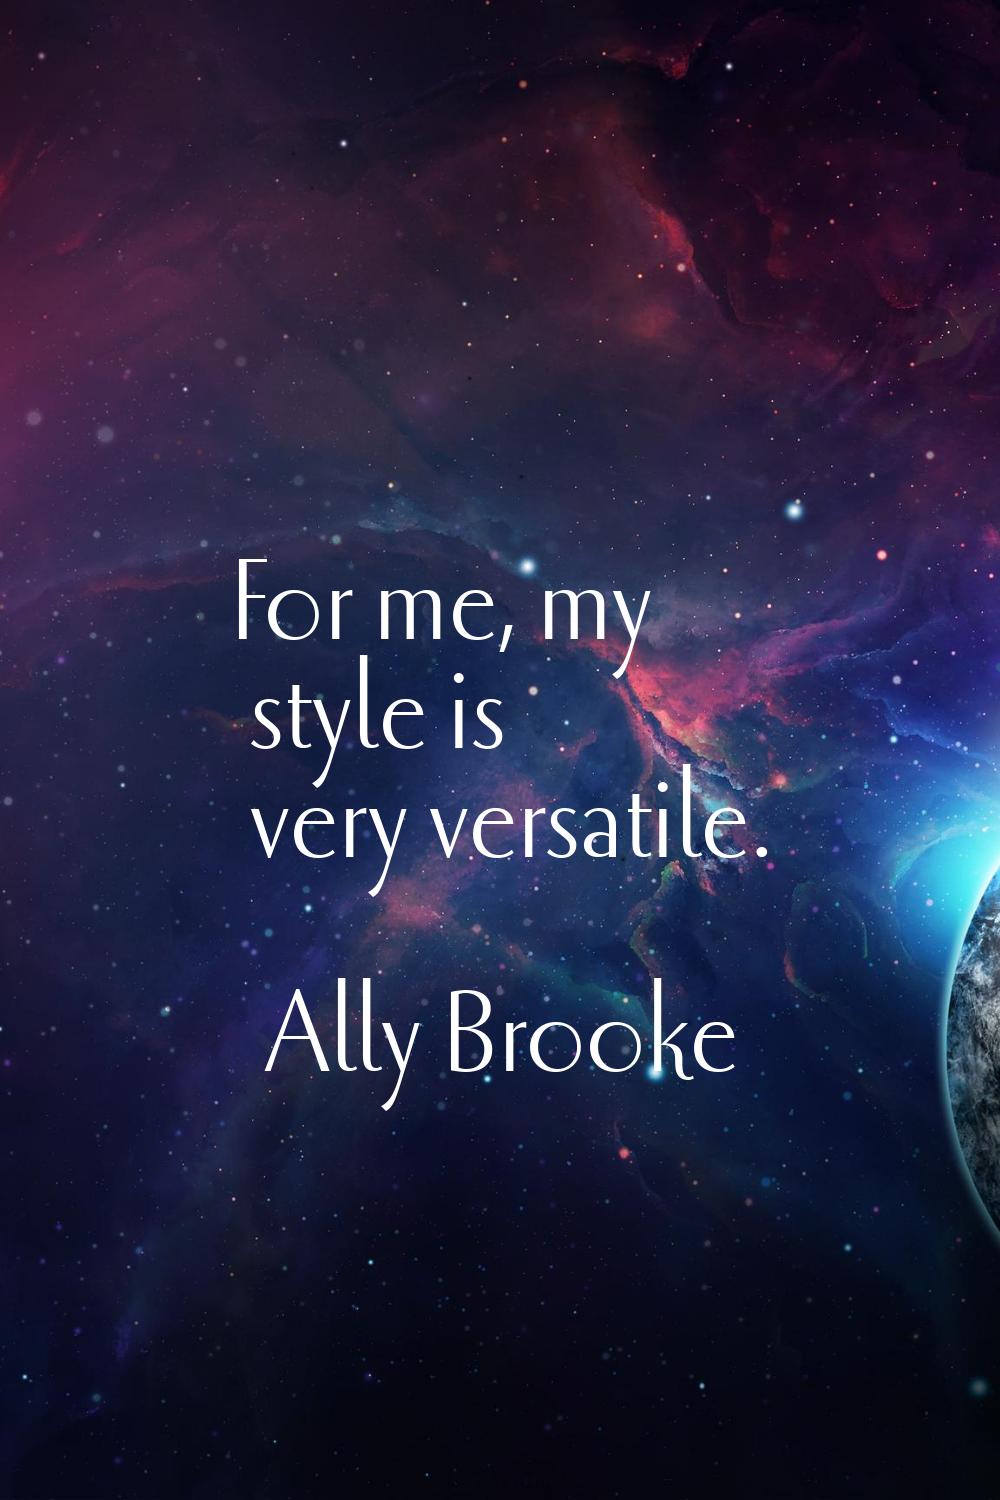 For me, my style is very versatile.